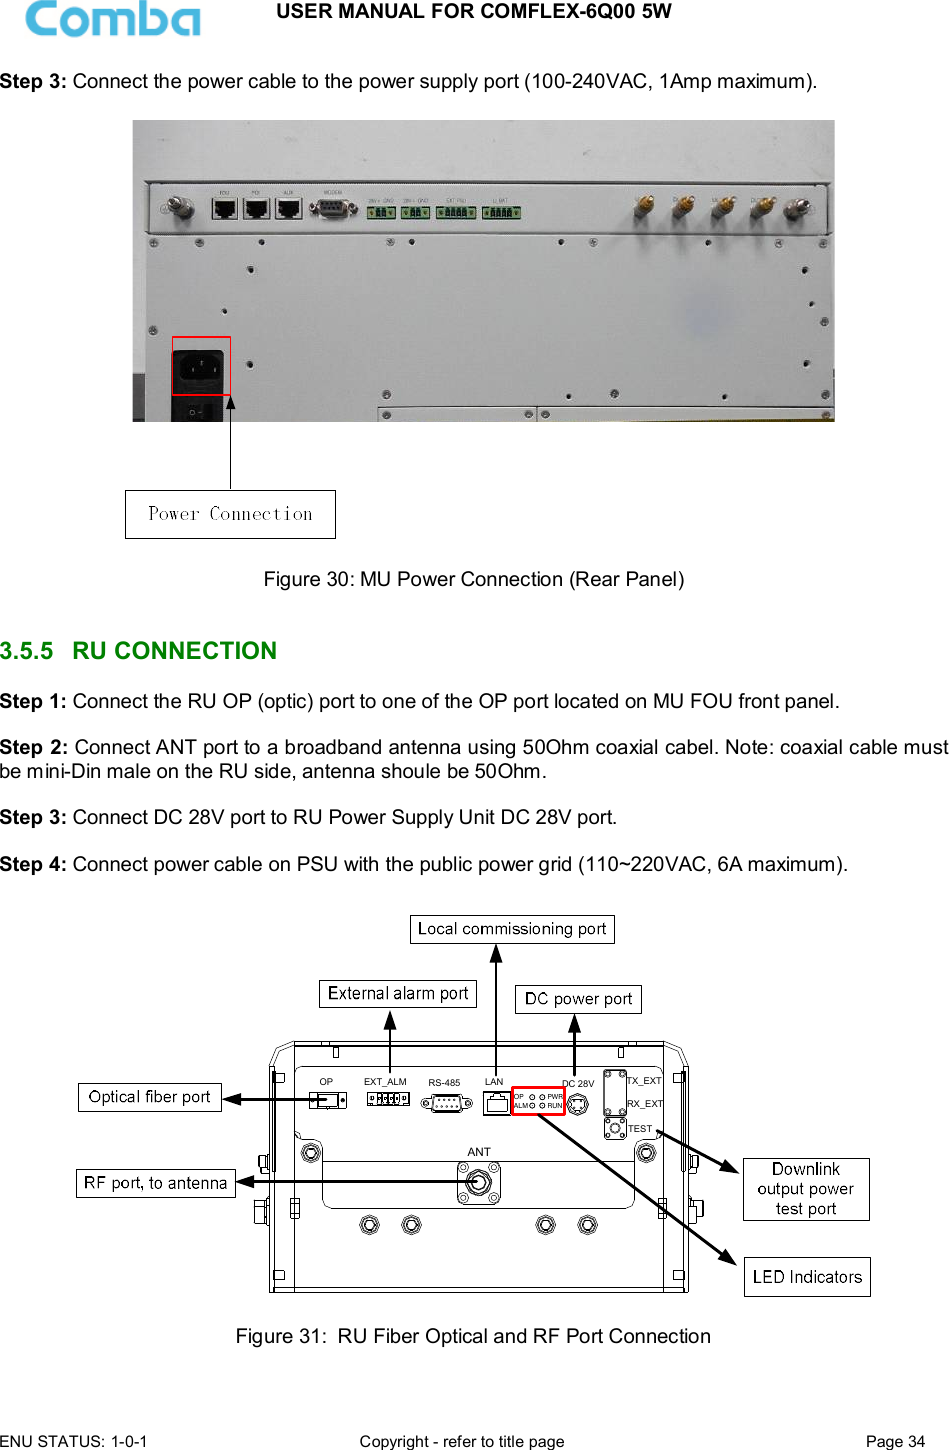 USER MANUAL FOR COMFLEX-6Q00 5W  ENU STATUS: 1-0-1  Copyright - refer to title page  Page 34      Step 3: Connect the power cable to the power supply port (100-240VAC, 1Amp maximum).    Figure 30: MU Power Connection (Rear Panel)   3.5.5  RU CONNECTION  Step 1: Connect the RU OP (optic) port to one of the OP port located on MU FOU front panel.  Step 2: Connect ANT port to a broadband antenna using 50Ohm coaxial cabel. Note: coaxial cable must be mini-Din male on the RU side, antenna shoule be 50Ohm.   Step 3: Connect DC 28V port to RU Power Supply Unit DC 28V port.  Step 4: Connect power cable on PSU with the public power grid (110~220VAC, 6A maximum).  ANTRX_EXTTX_EXTTESTPWRRUNALMOPDC 28VLANRS-485EXT_ALMOP Figure 31:  RU Fiber Optical and RF Port Connection  